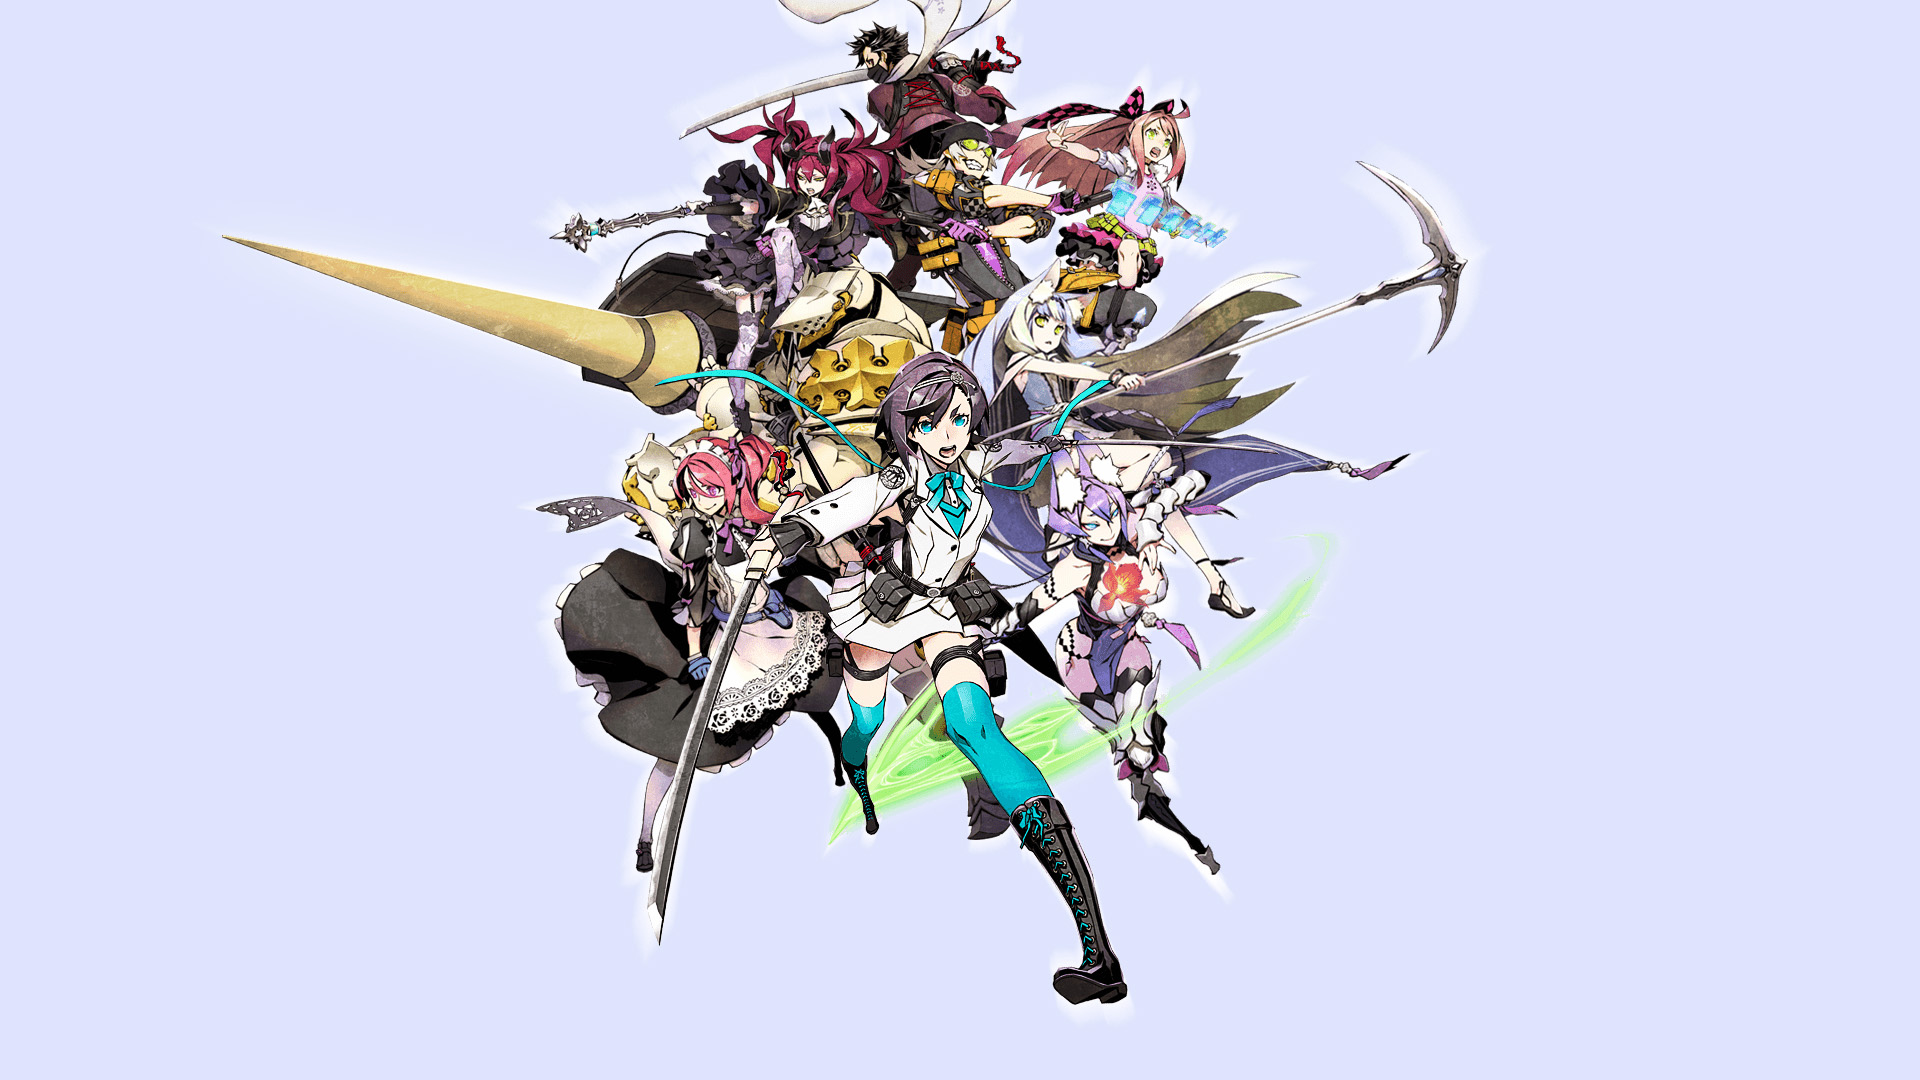 Video Game 7th Dragon III: Code VFD HD Wallpaper | Background Image